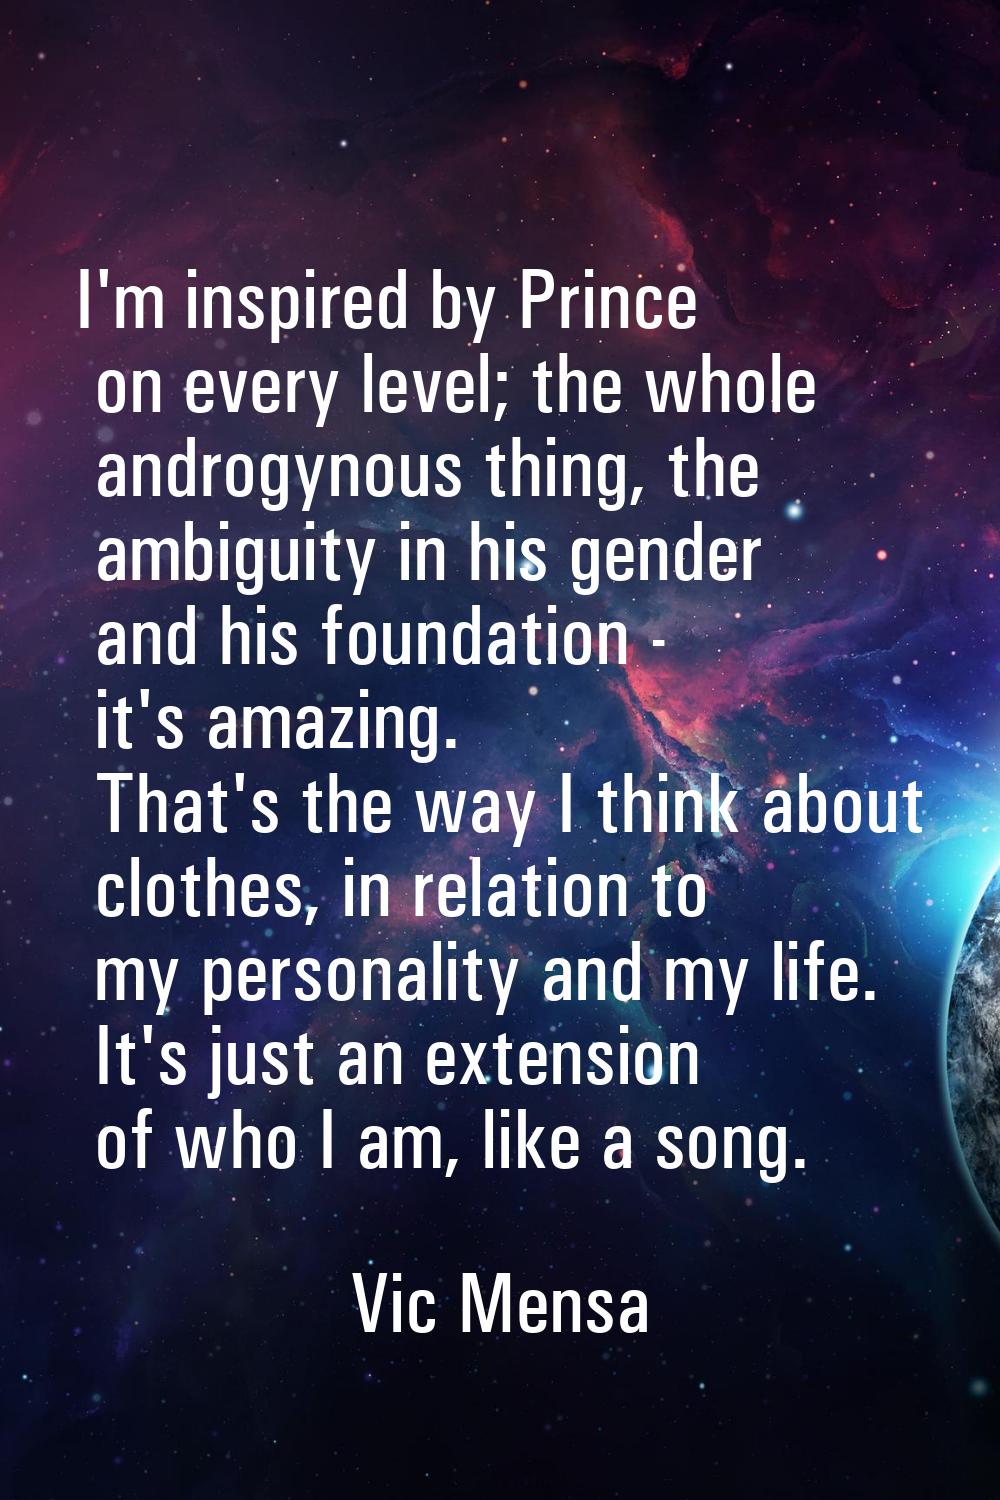 I'm inspired by Prince on every level; the whole androgynous thing, the ambiguity in his gender and